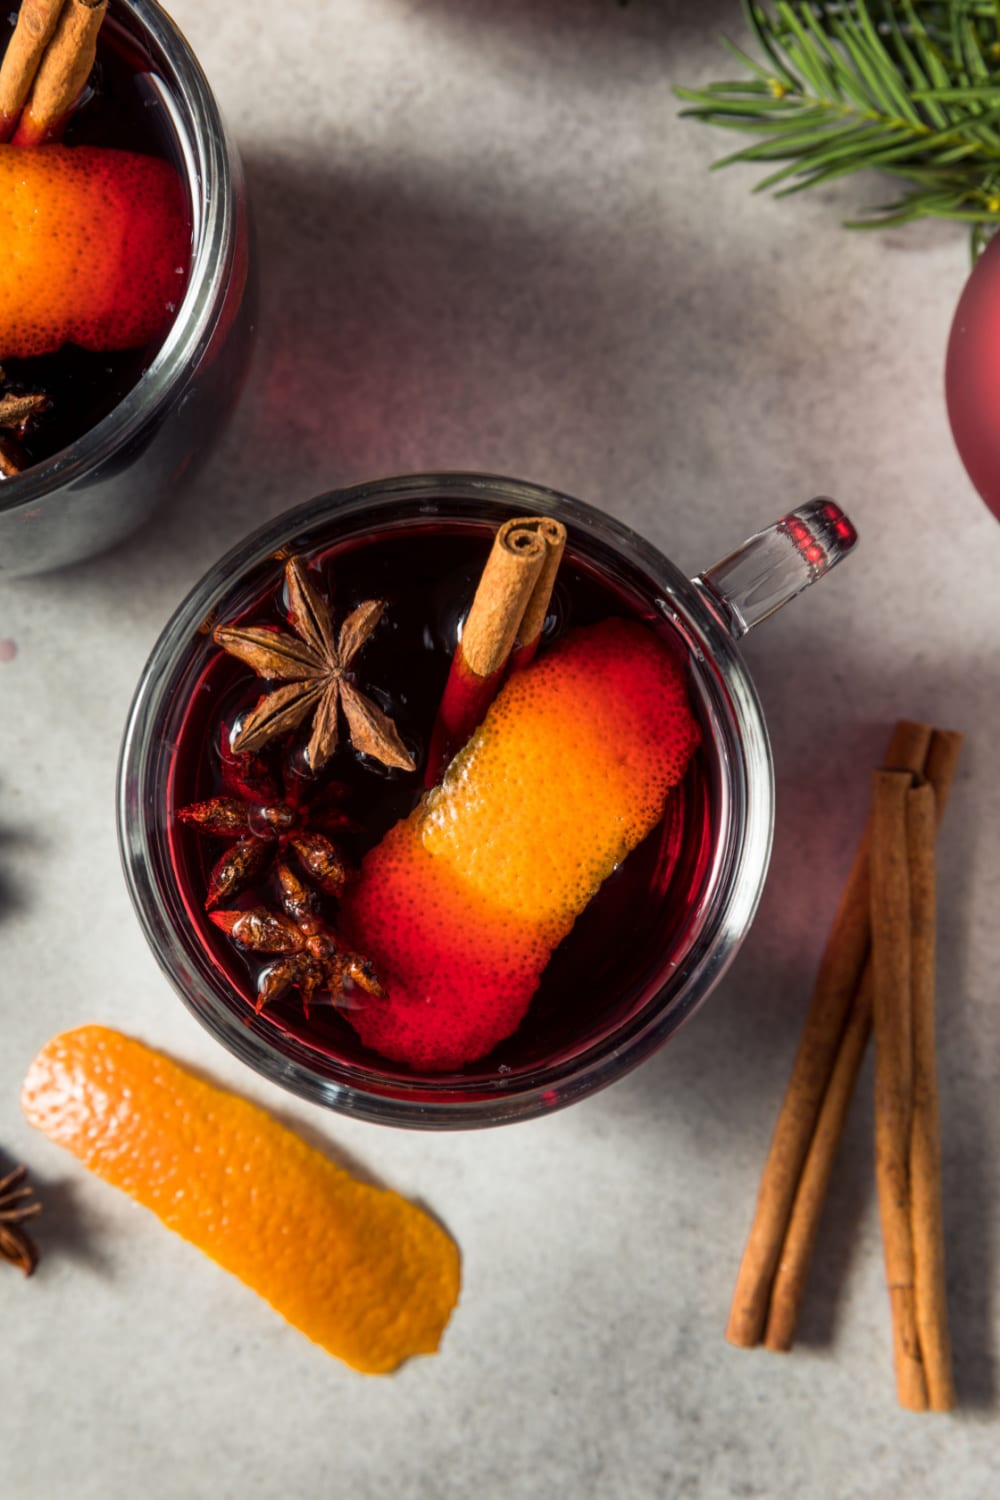 Red Wine Infused Mulling Spices On Wine Glogg